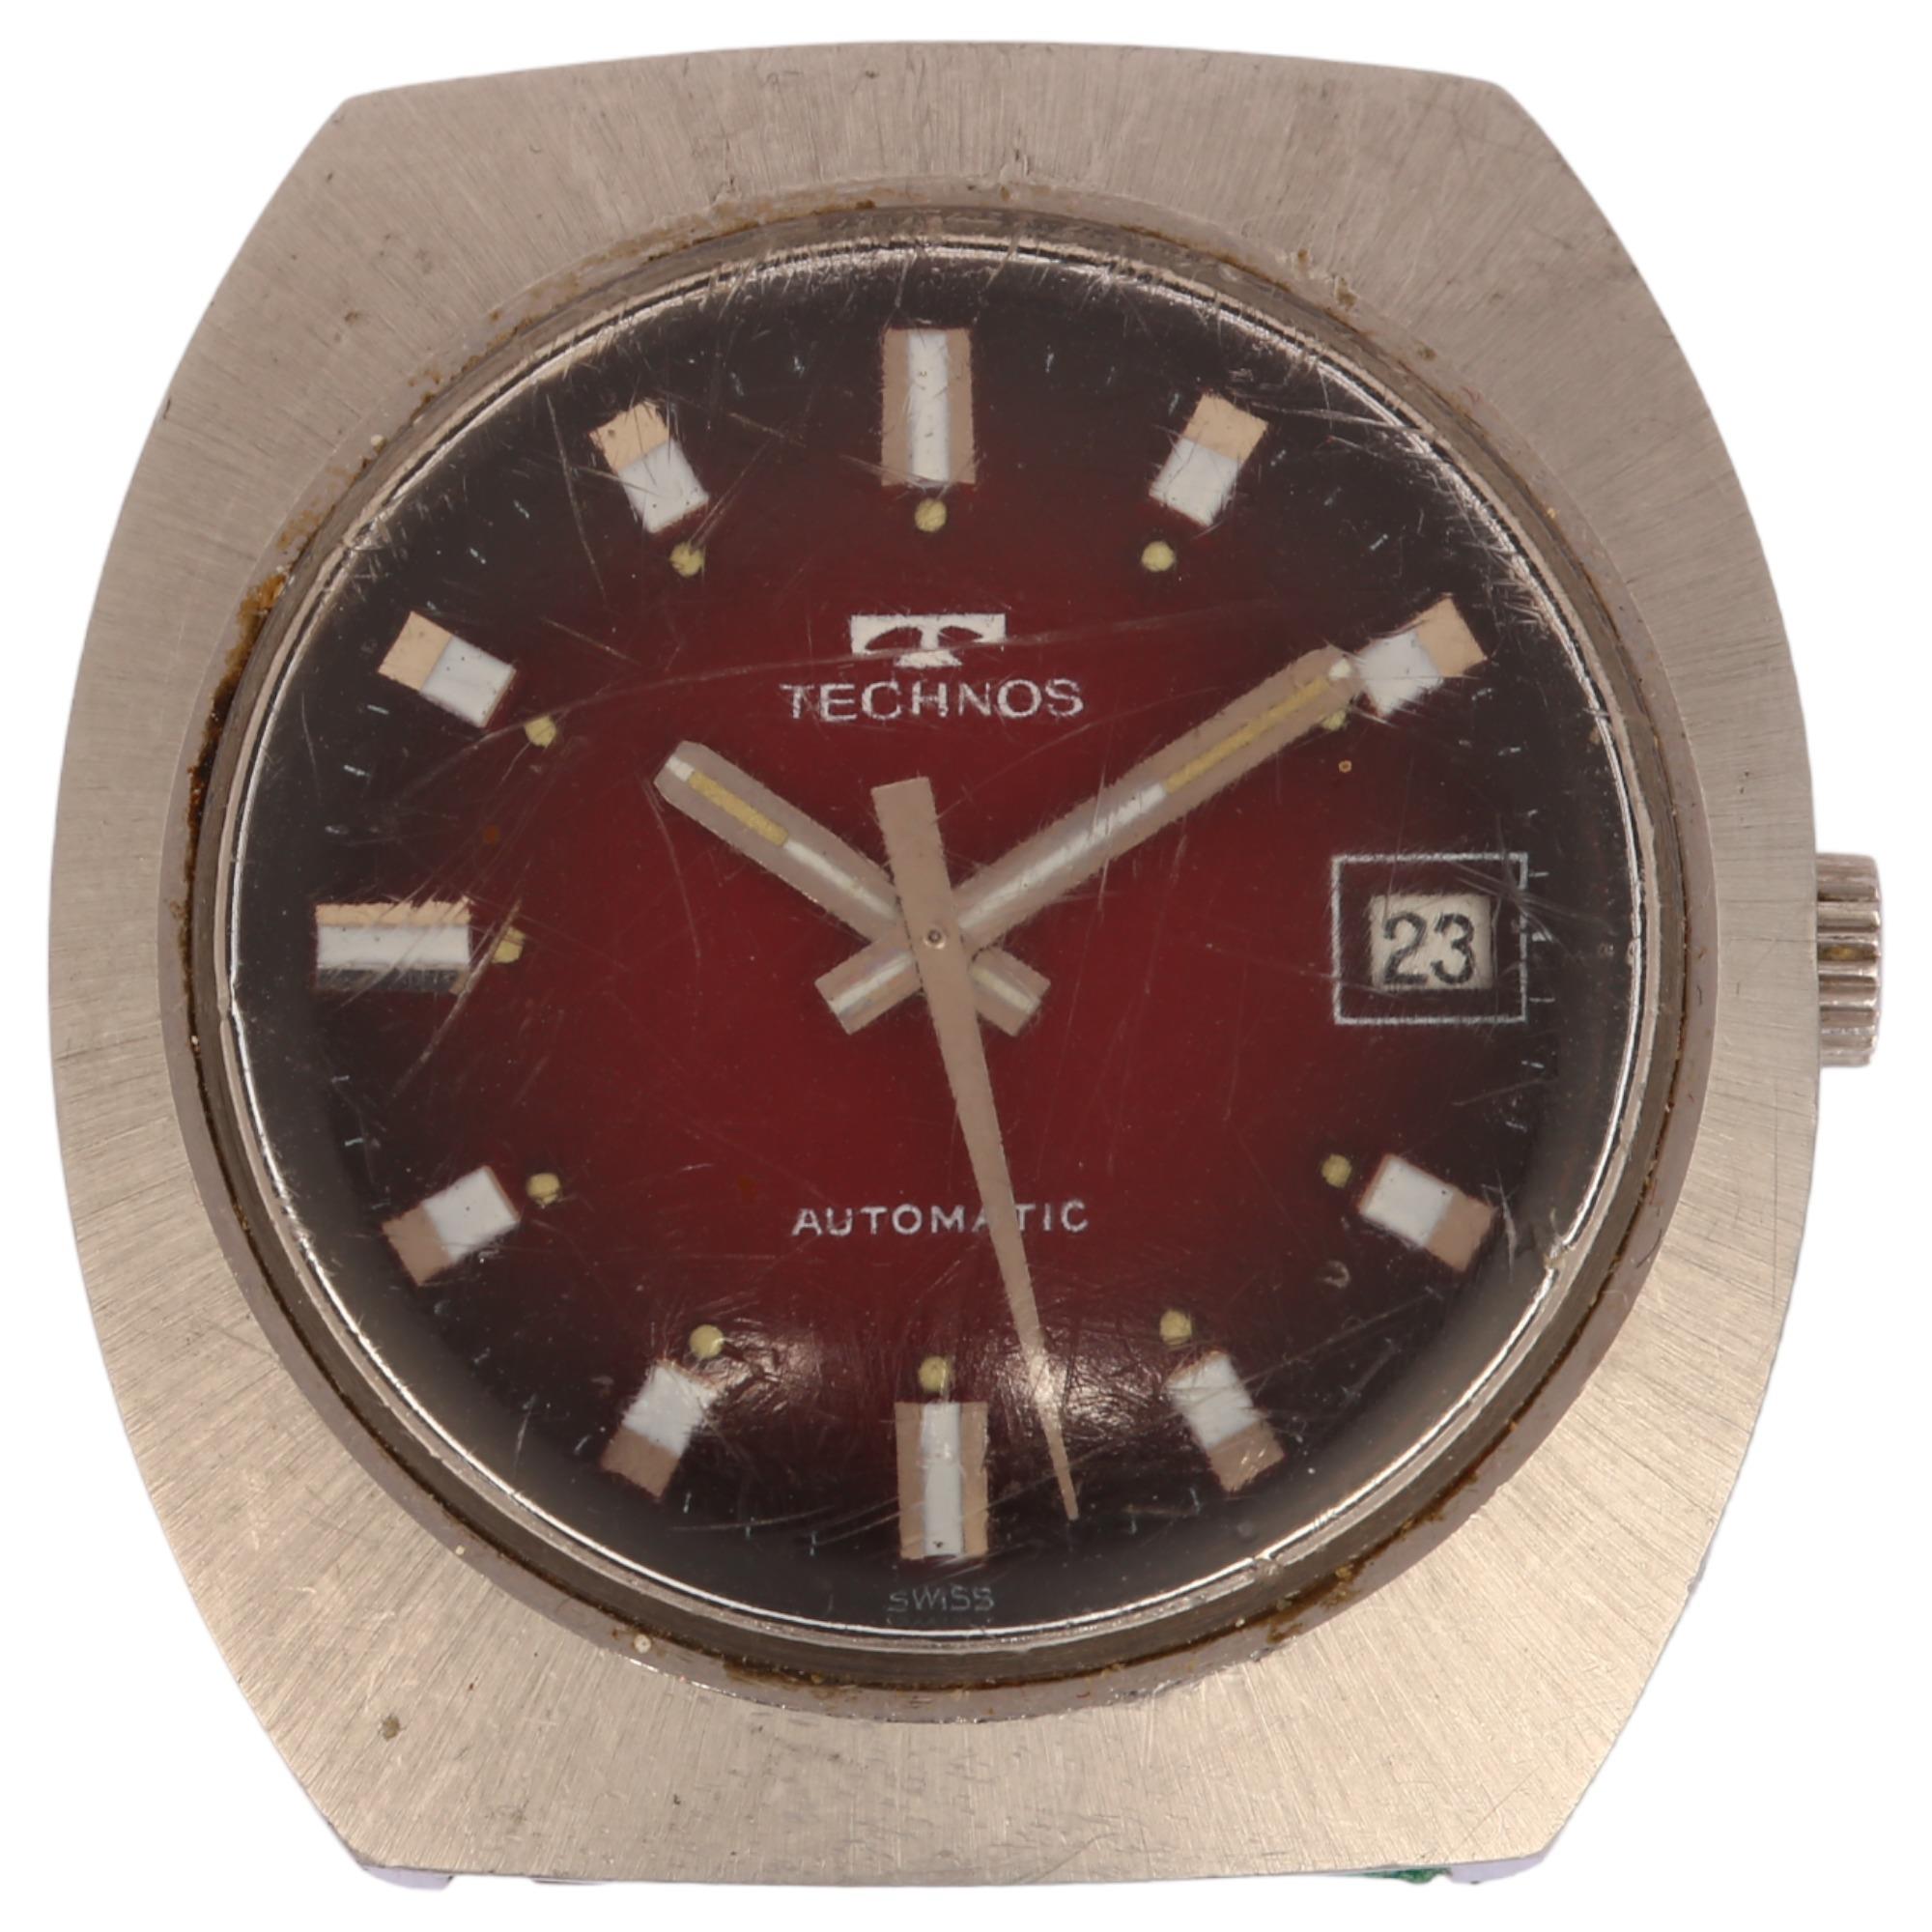 TECHNOS - a stainless steel automatic wristwatch head, ref. 10182, circa 1970s, red ombre dial